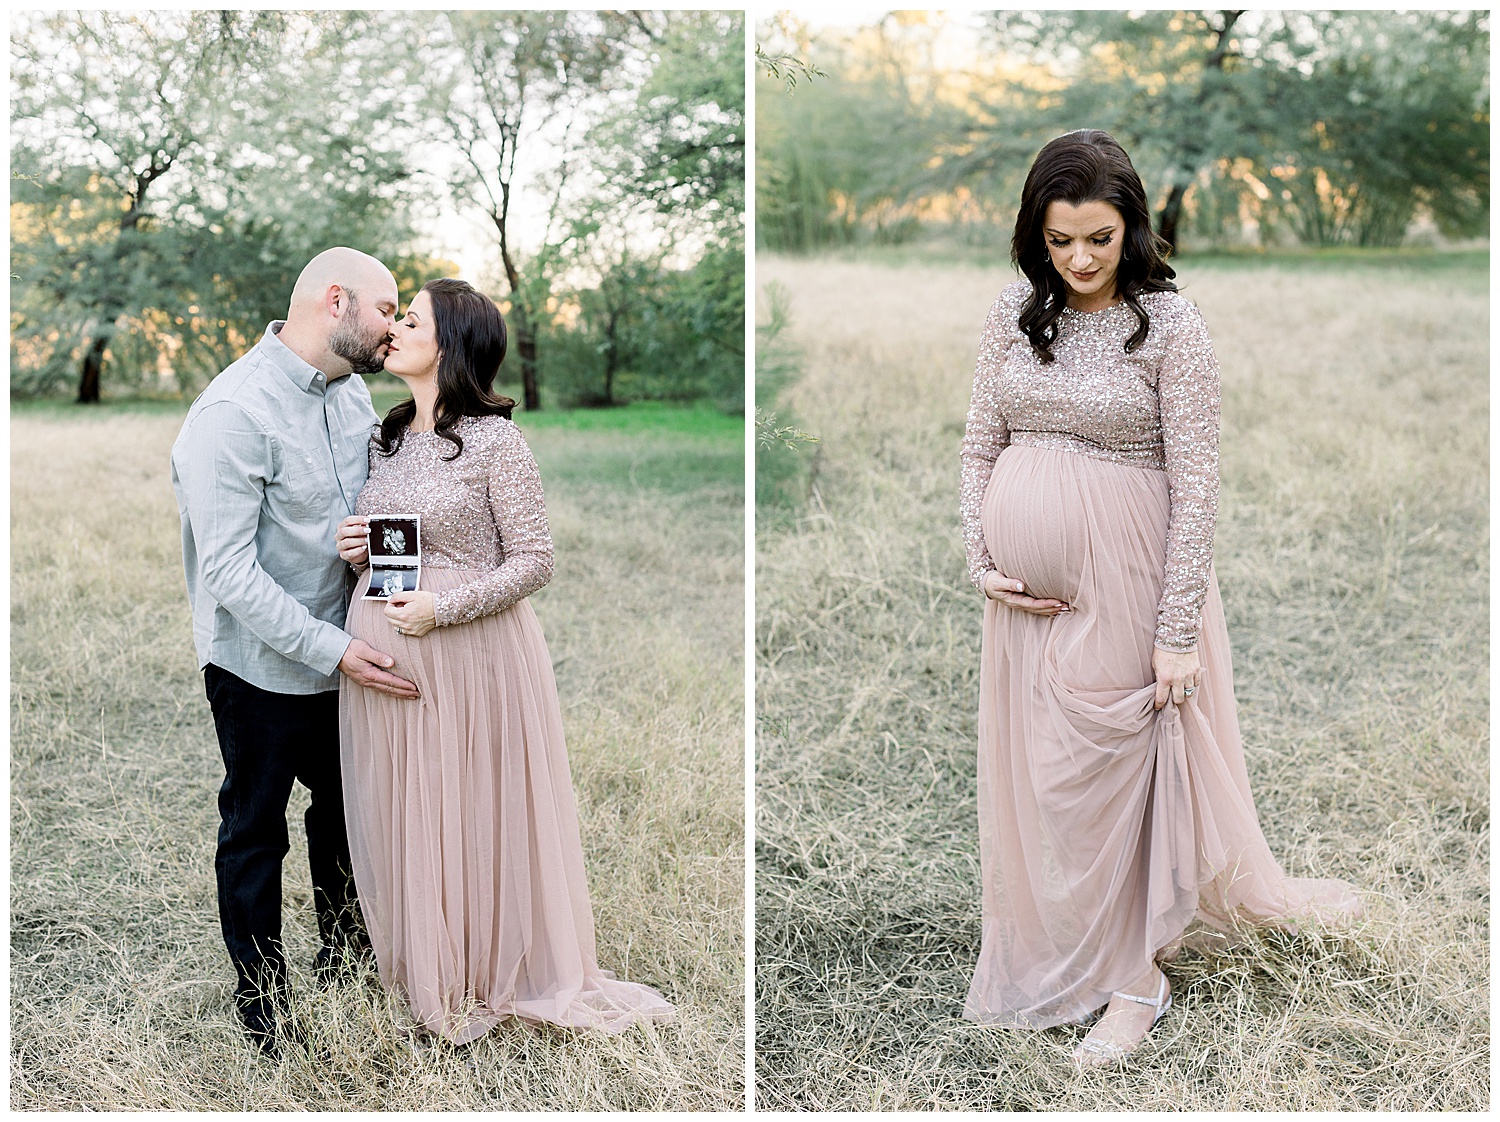 Pretty in Pink Scottsdale Maternity Session for baby girl, pink tulle and sparkle gown for Maternity photos